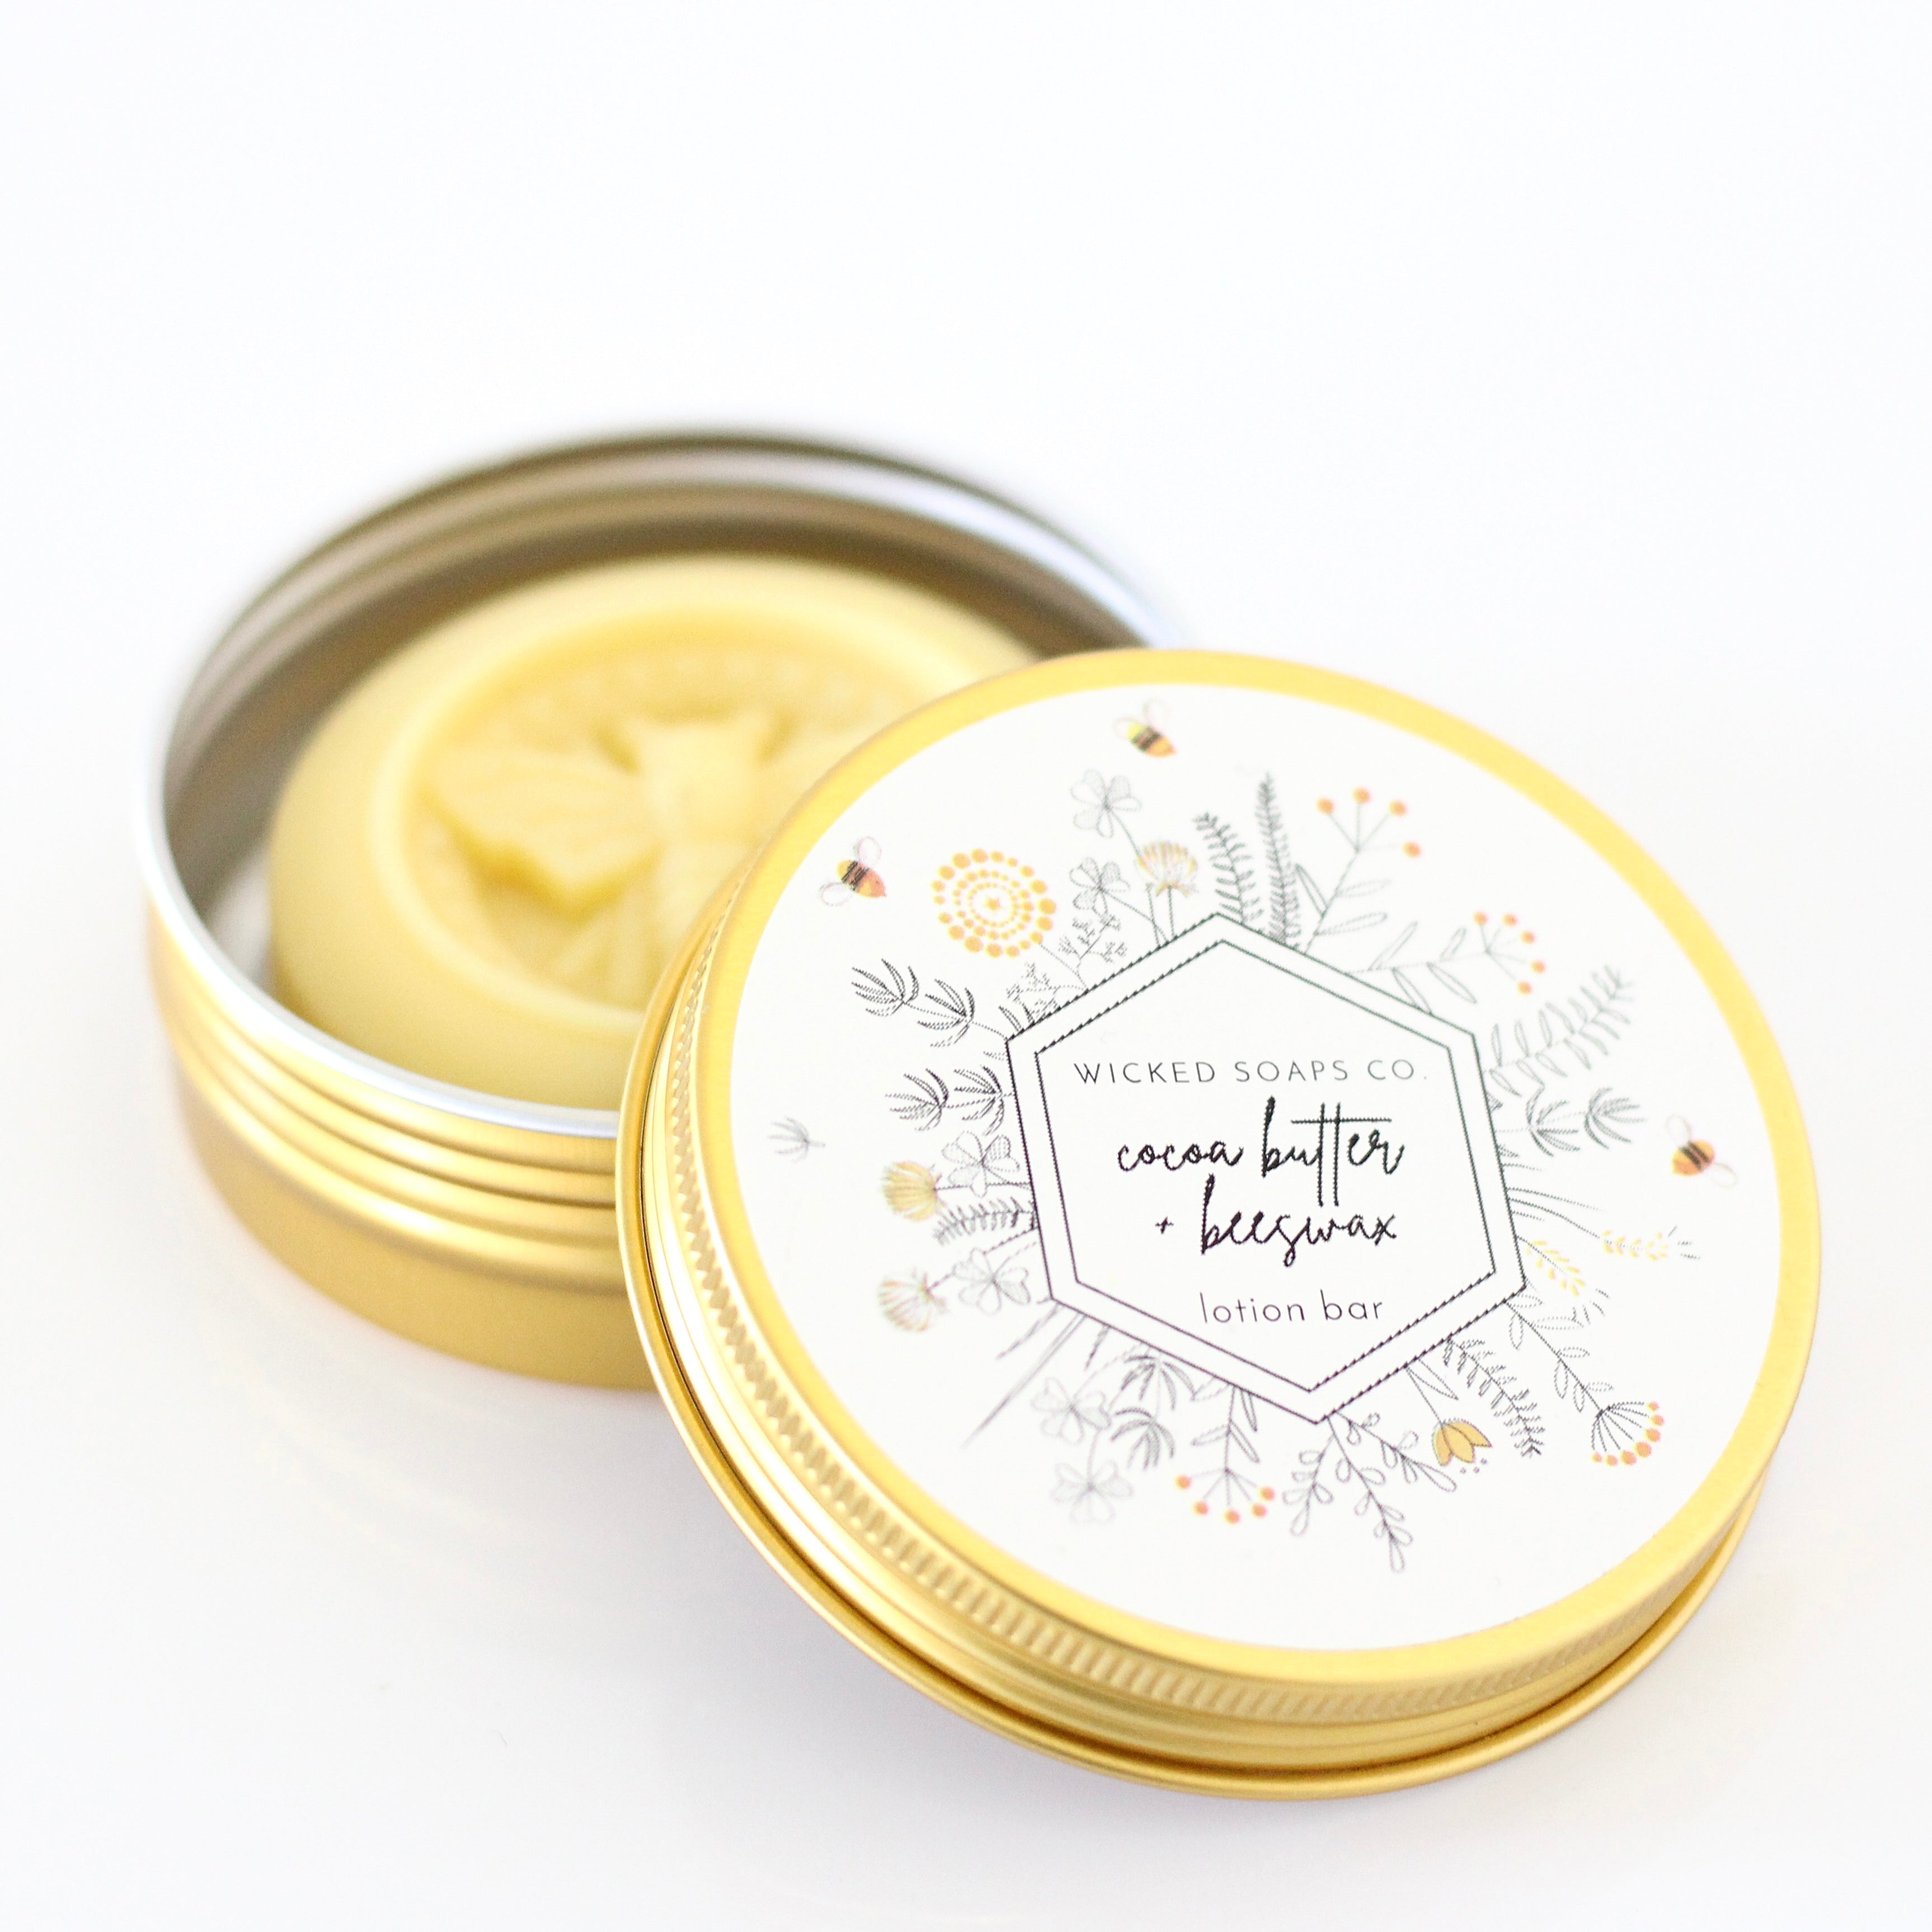 Cocoa Butter + Beeswax Lotion Bar